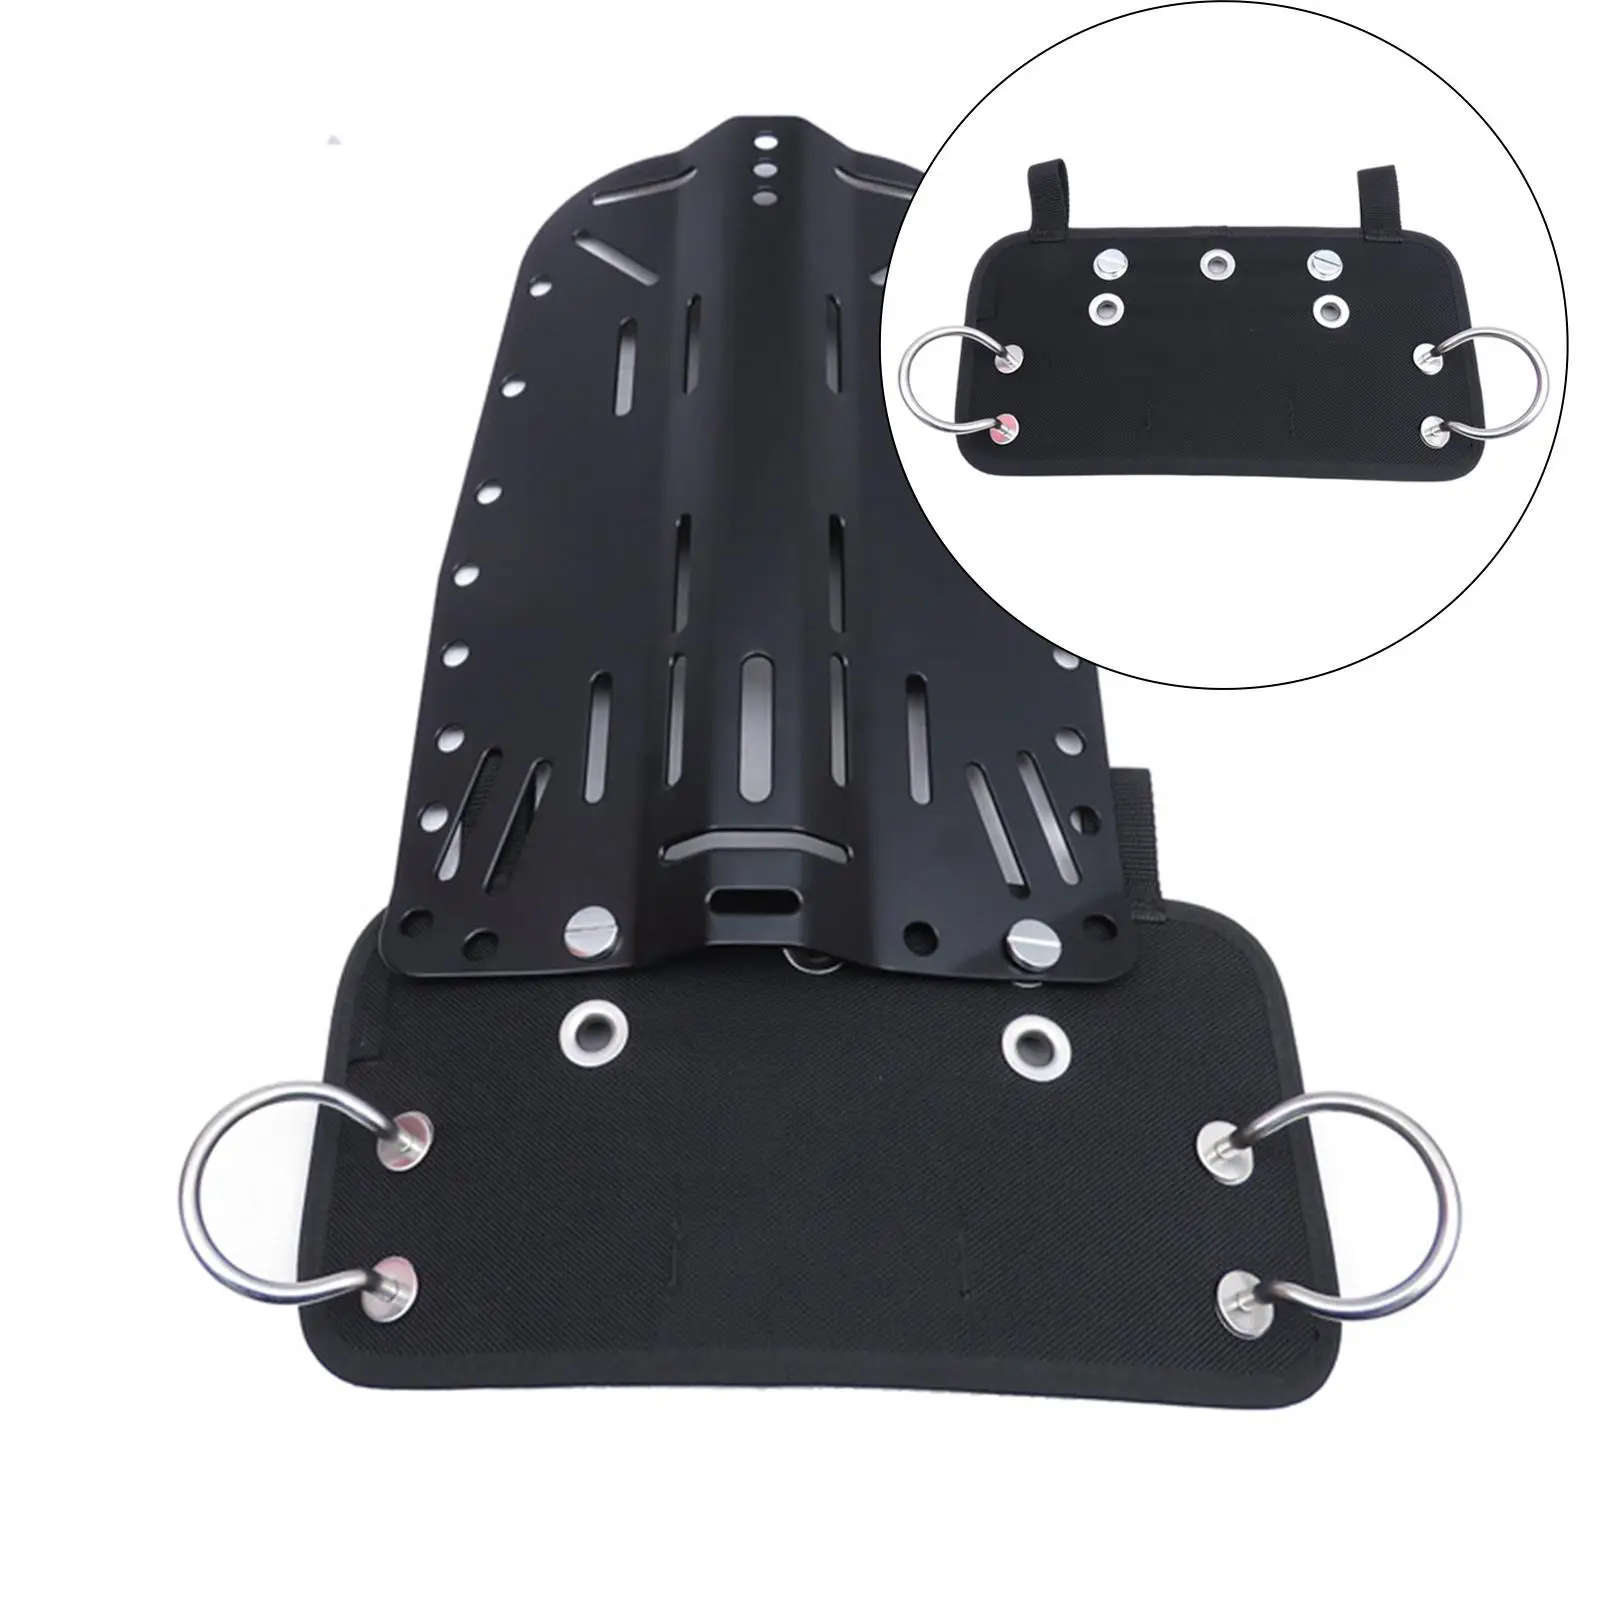 Scuba Tech Diving Butt Plate Stainless Steel Handles Hanging Board for Sidemount W/ 2 Screws Buttplate Side or Back Mount Black